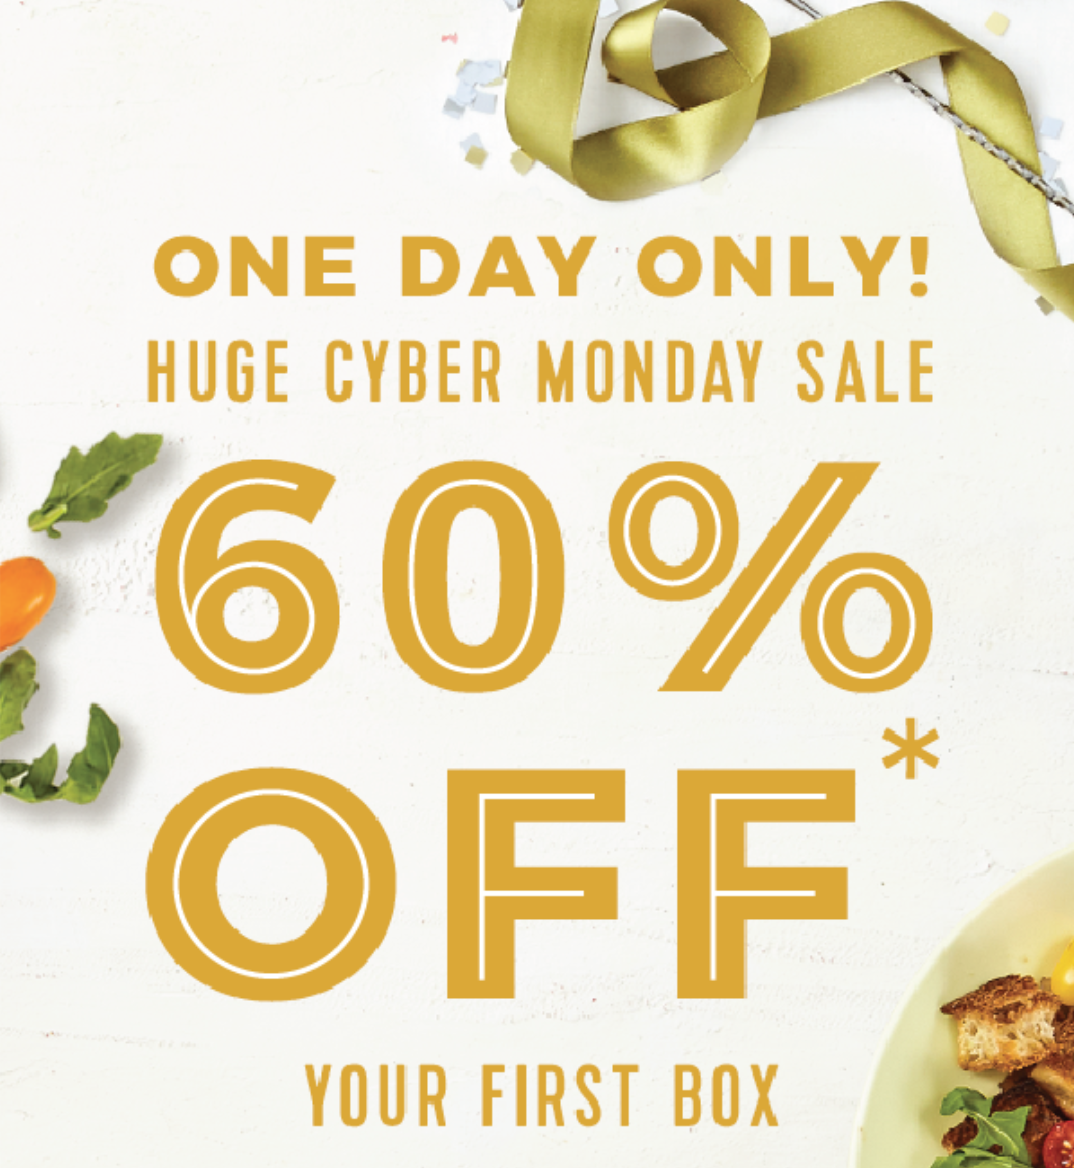 Hello Fresh Cyber Monday Coupon – 60% Off Your First Box!